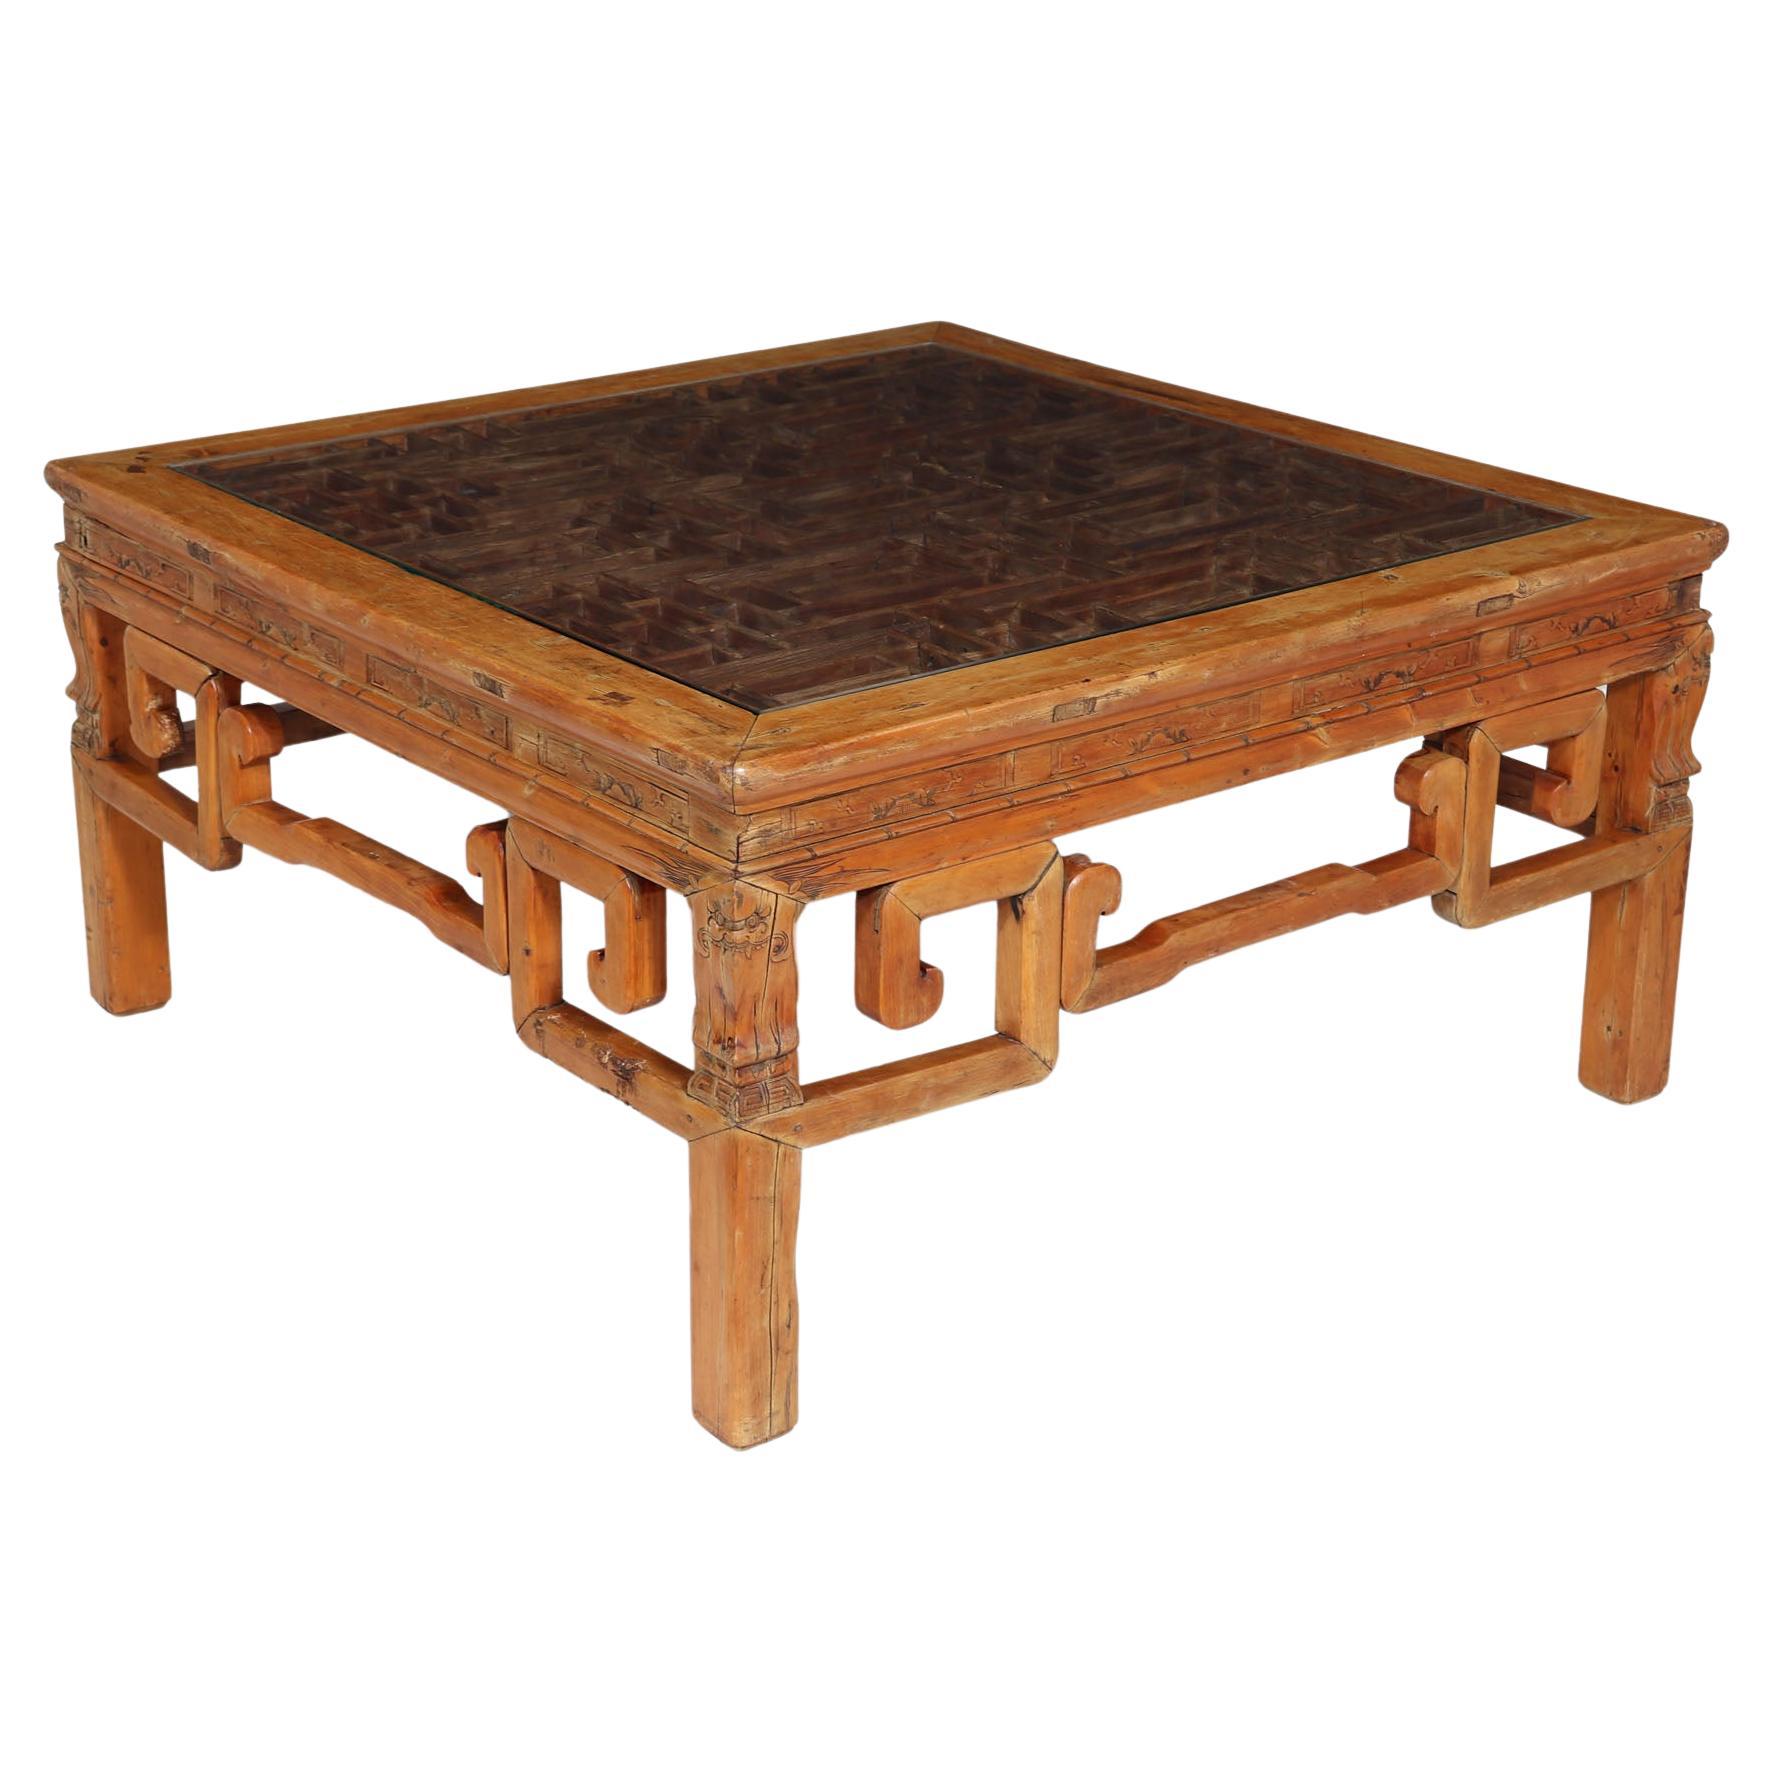 Antique Chinese Lattice Work Coffee Table For Sale